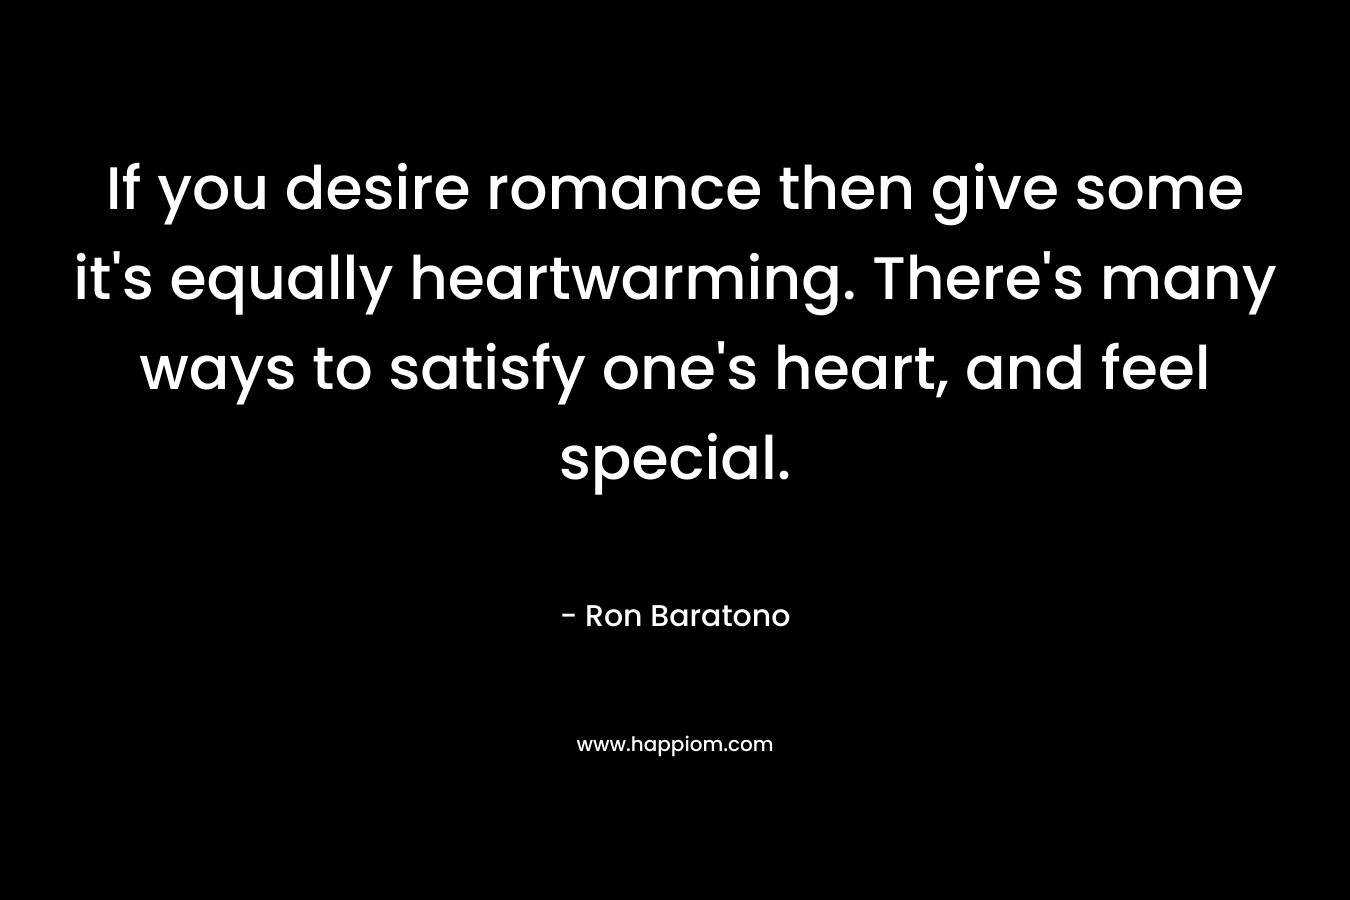 If you desire romance then give some it’s equally heartwarming. There’s many ways to satisfy one’s heart, and feel special. – Ron Baratono